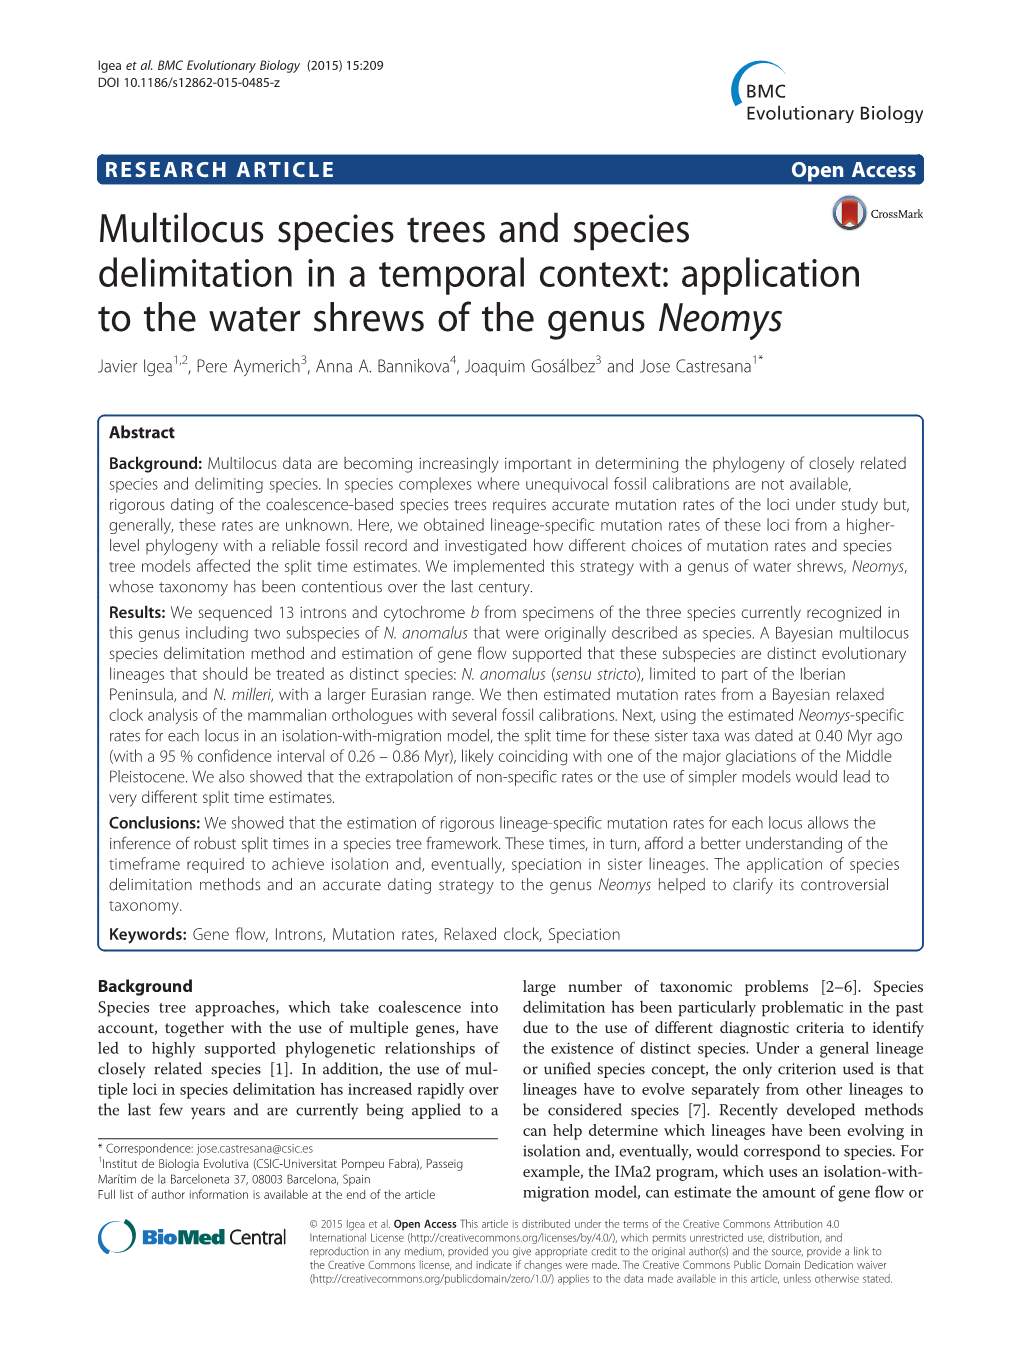 Application to the Water Shrews of the Genus Neomys Javier Igea1,2, Pere Aymerich3, Anna A